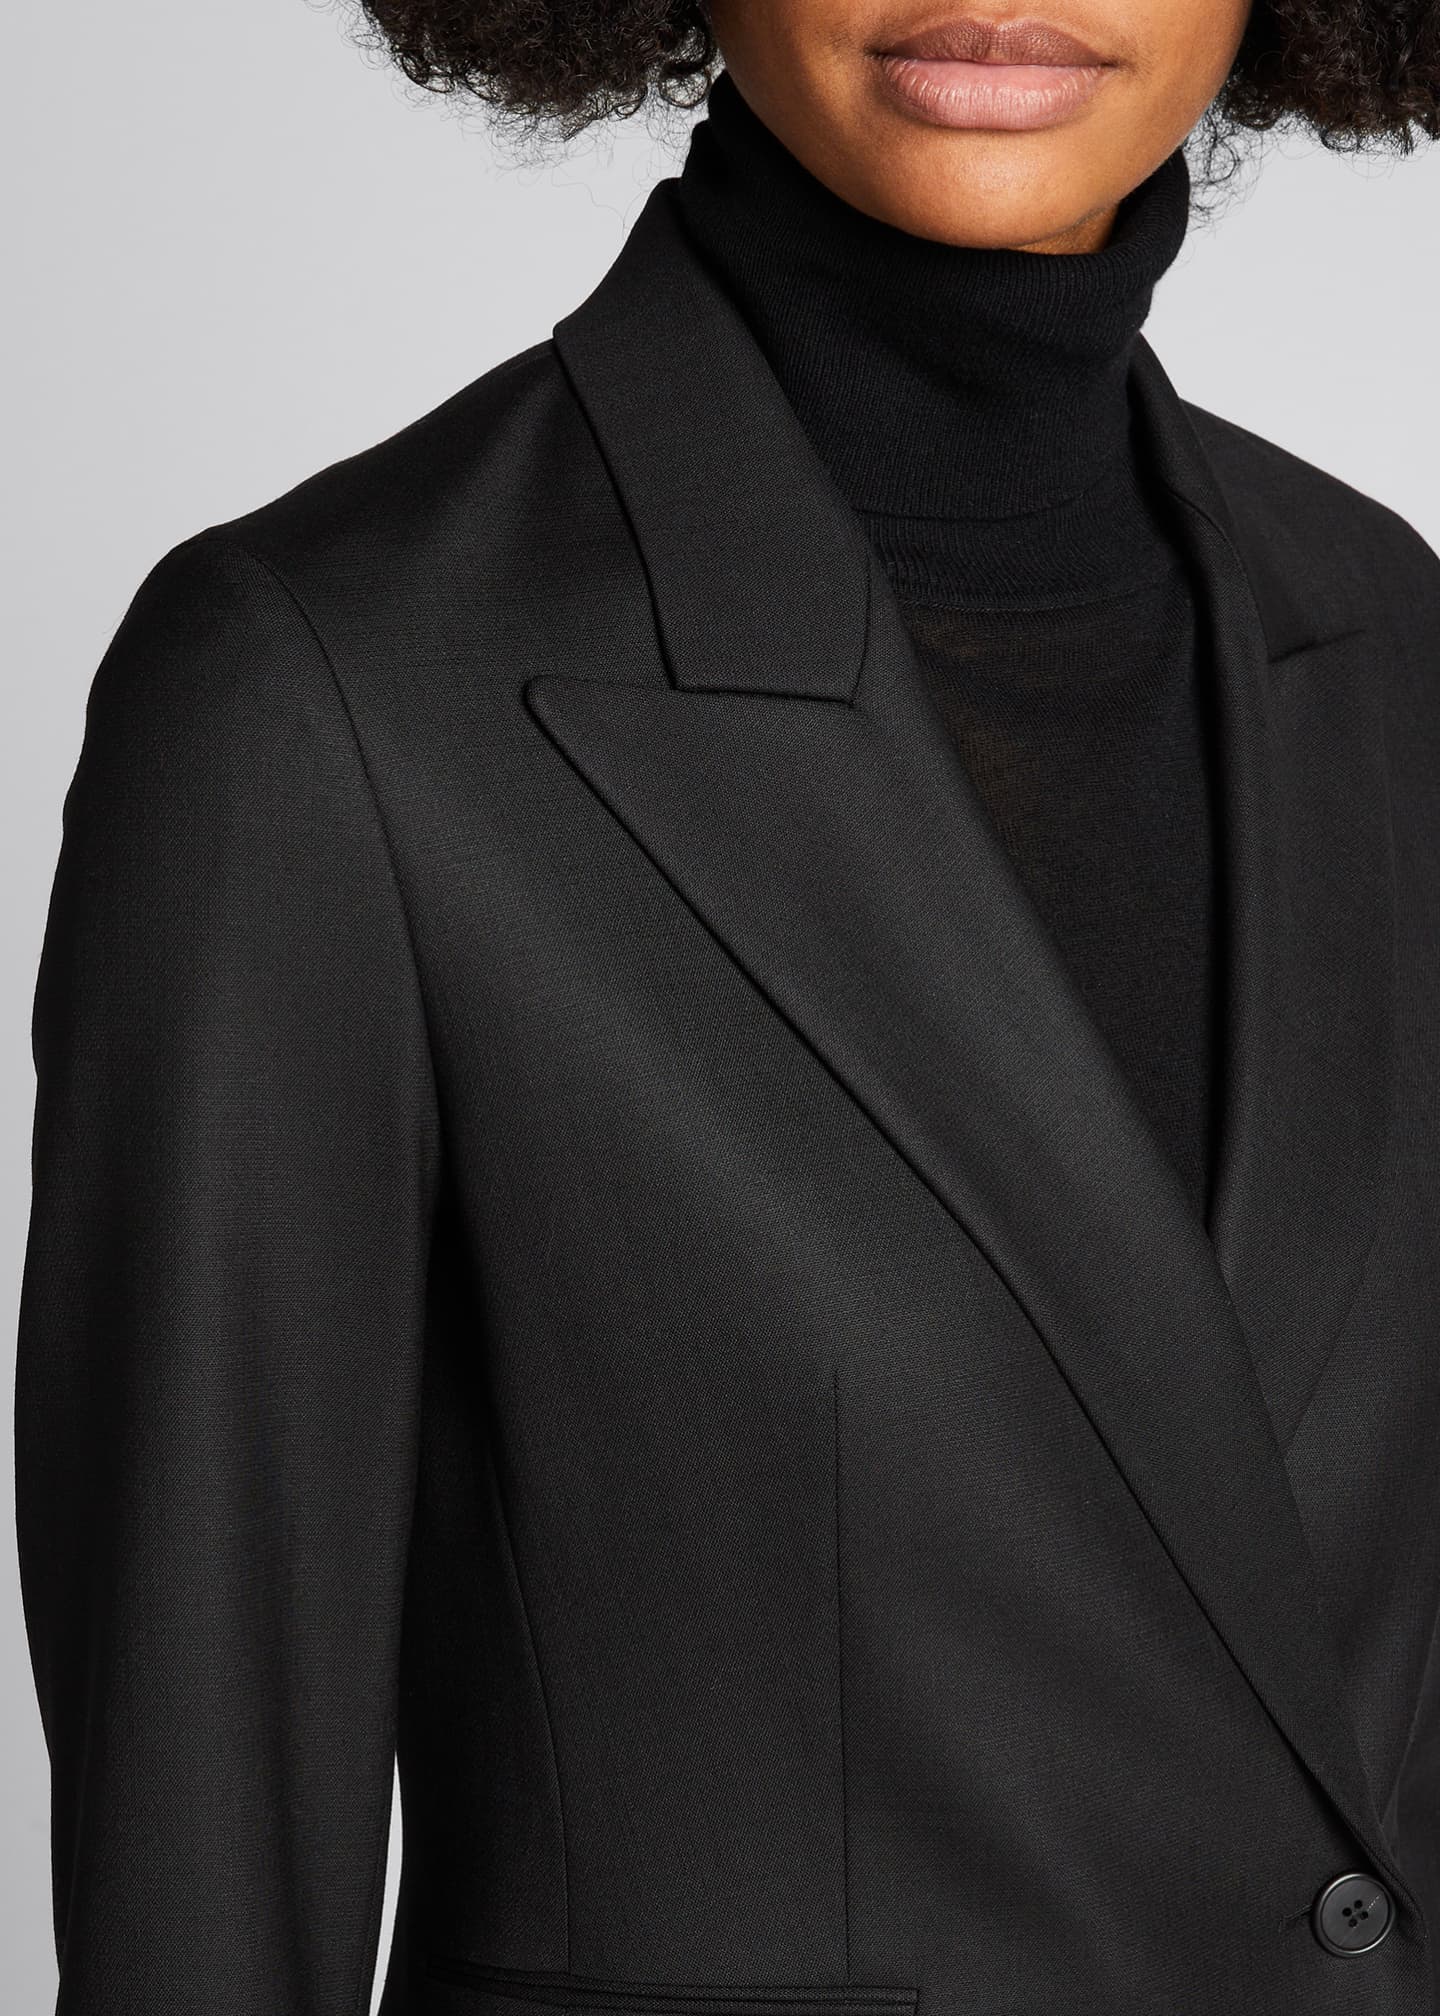 THE ROW Ciel Double-Breasted Wool Jacket - Bergdorf Goodman